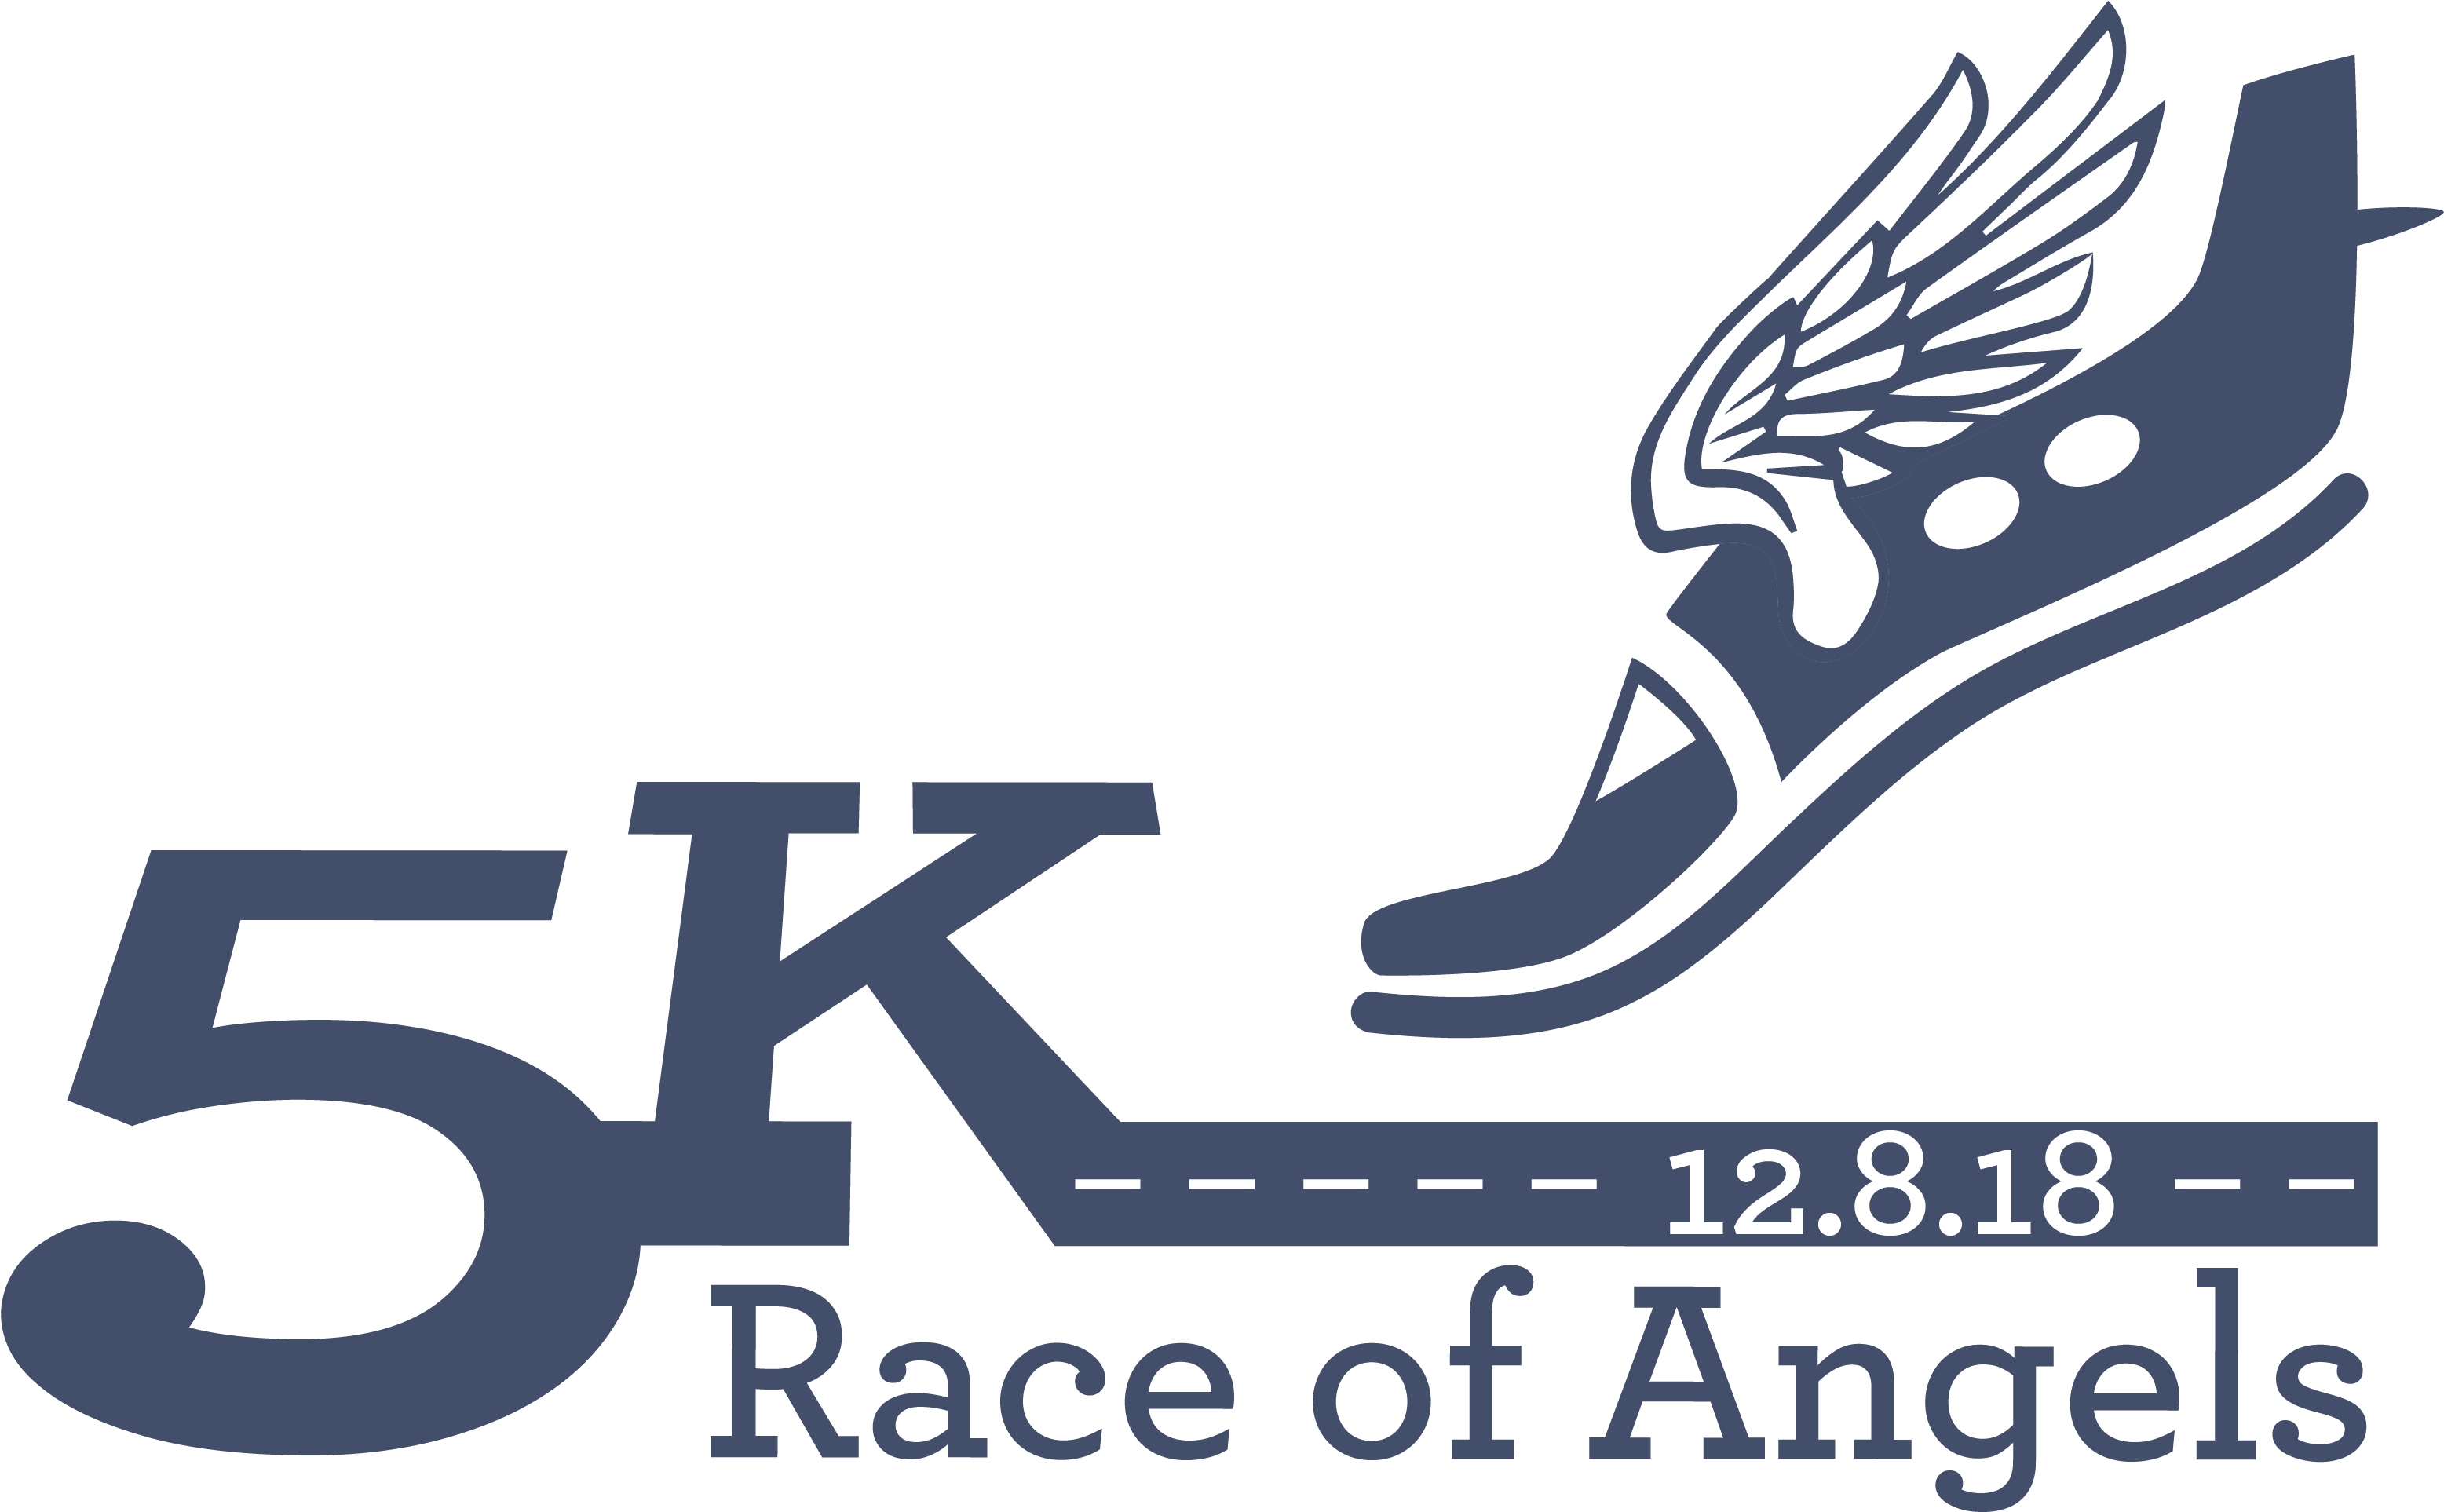 Race Of Angels 5k - Conroe-north Houston Regional Airport (3264x2164), Png Download